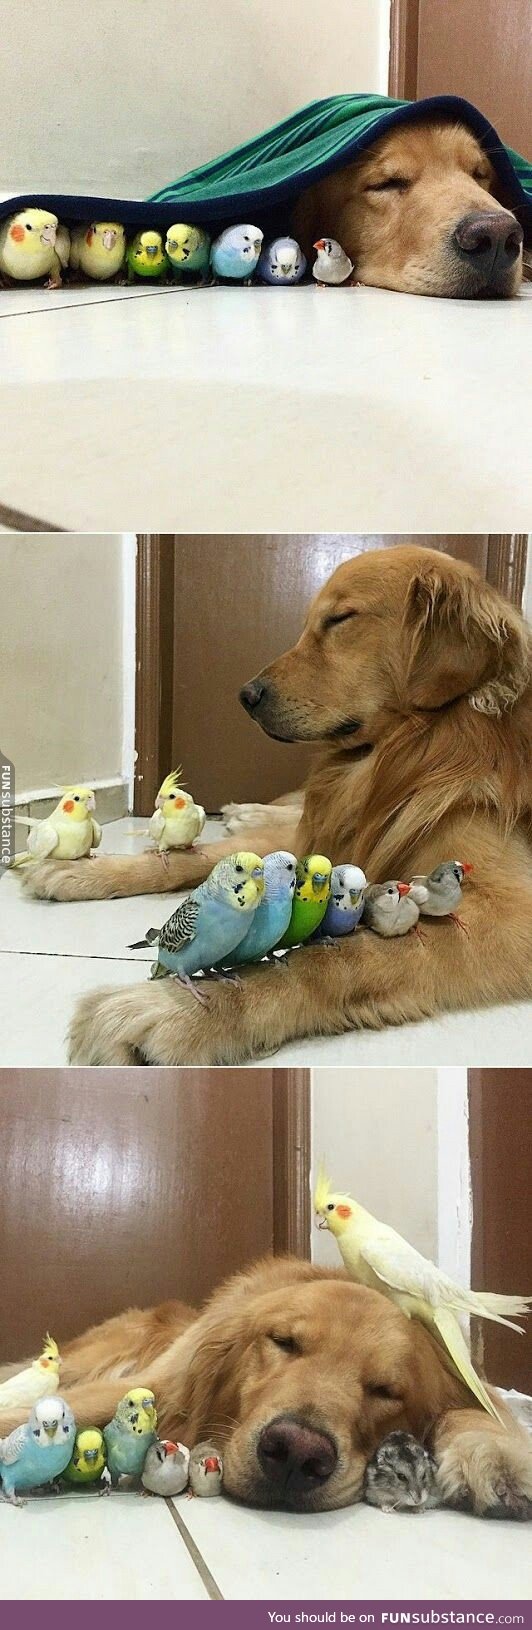 I don't think this is what they mean by "bird dog"